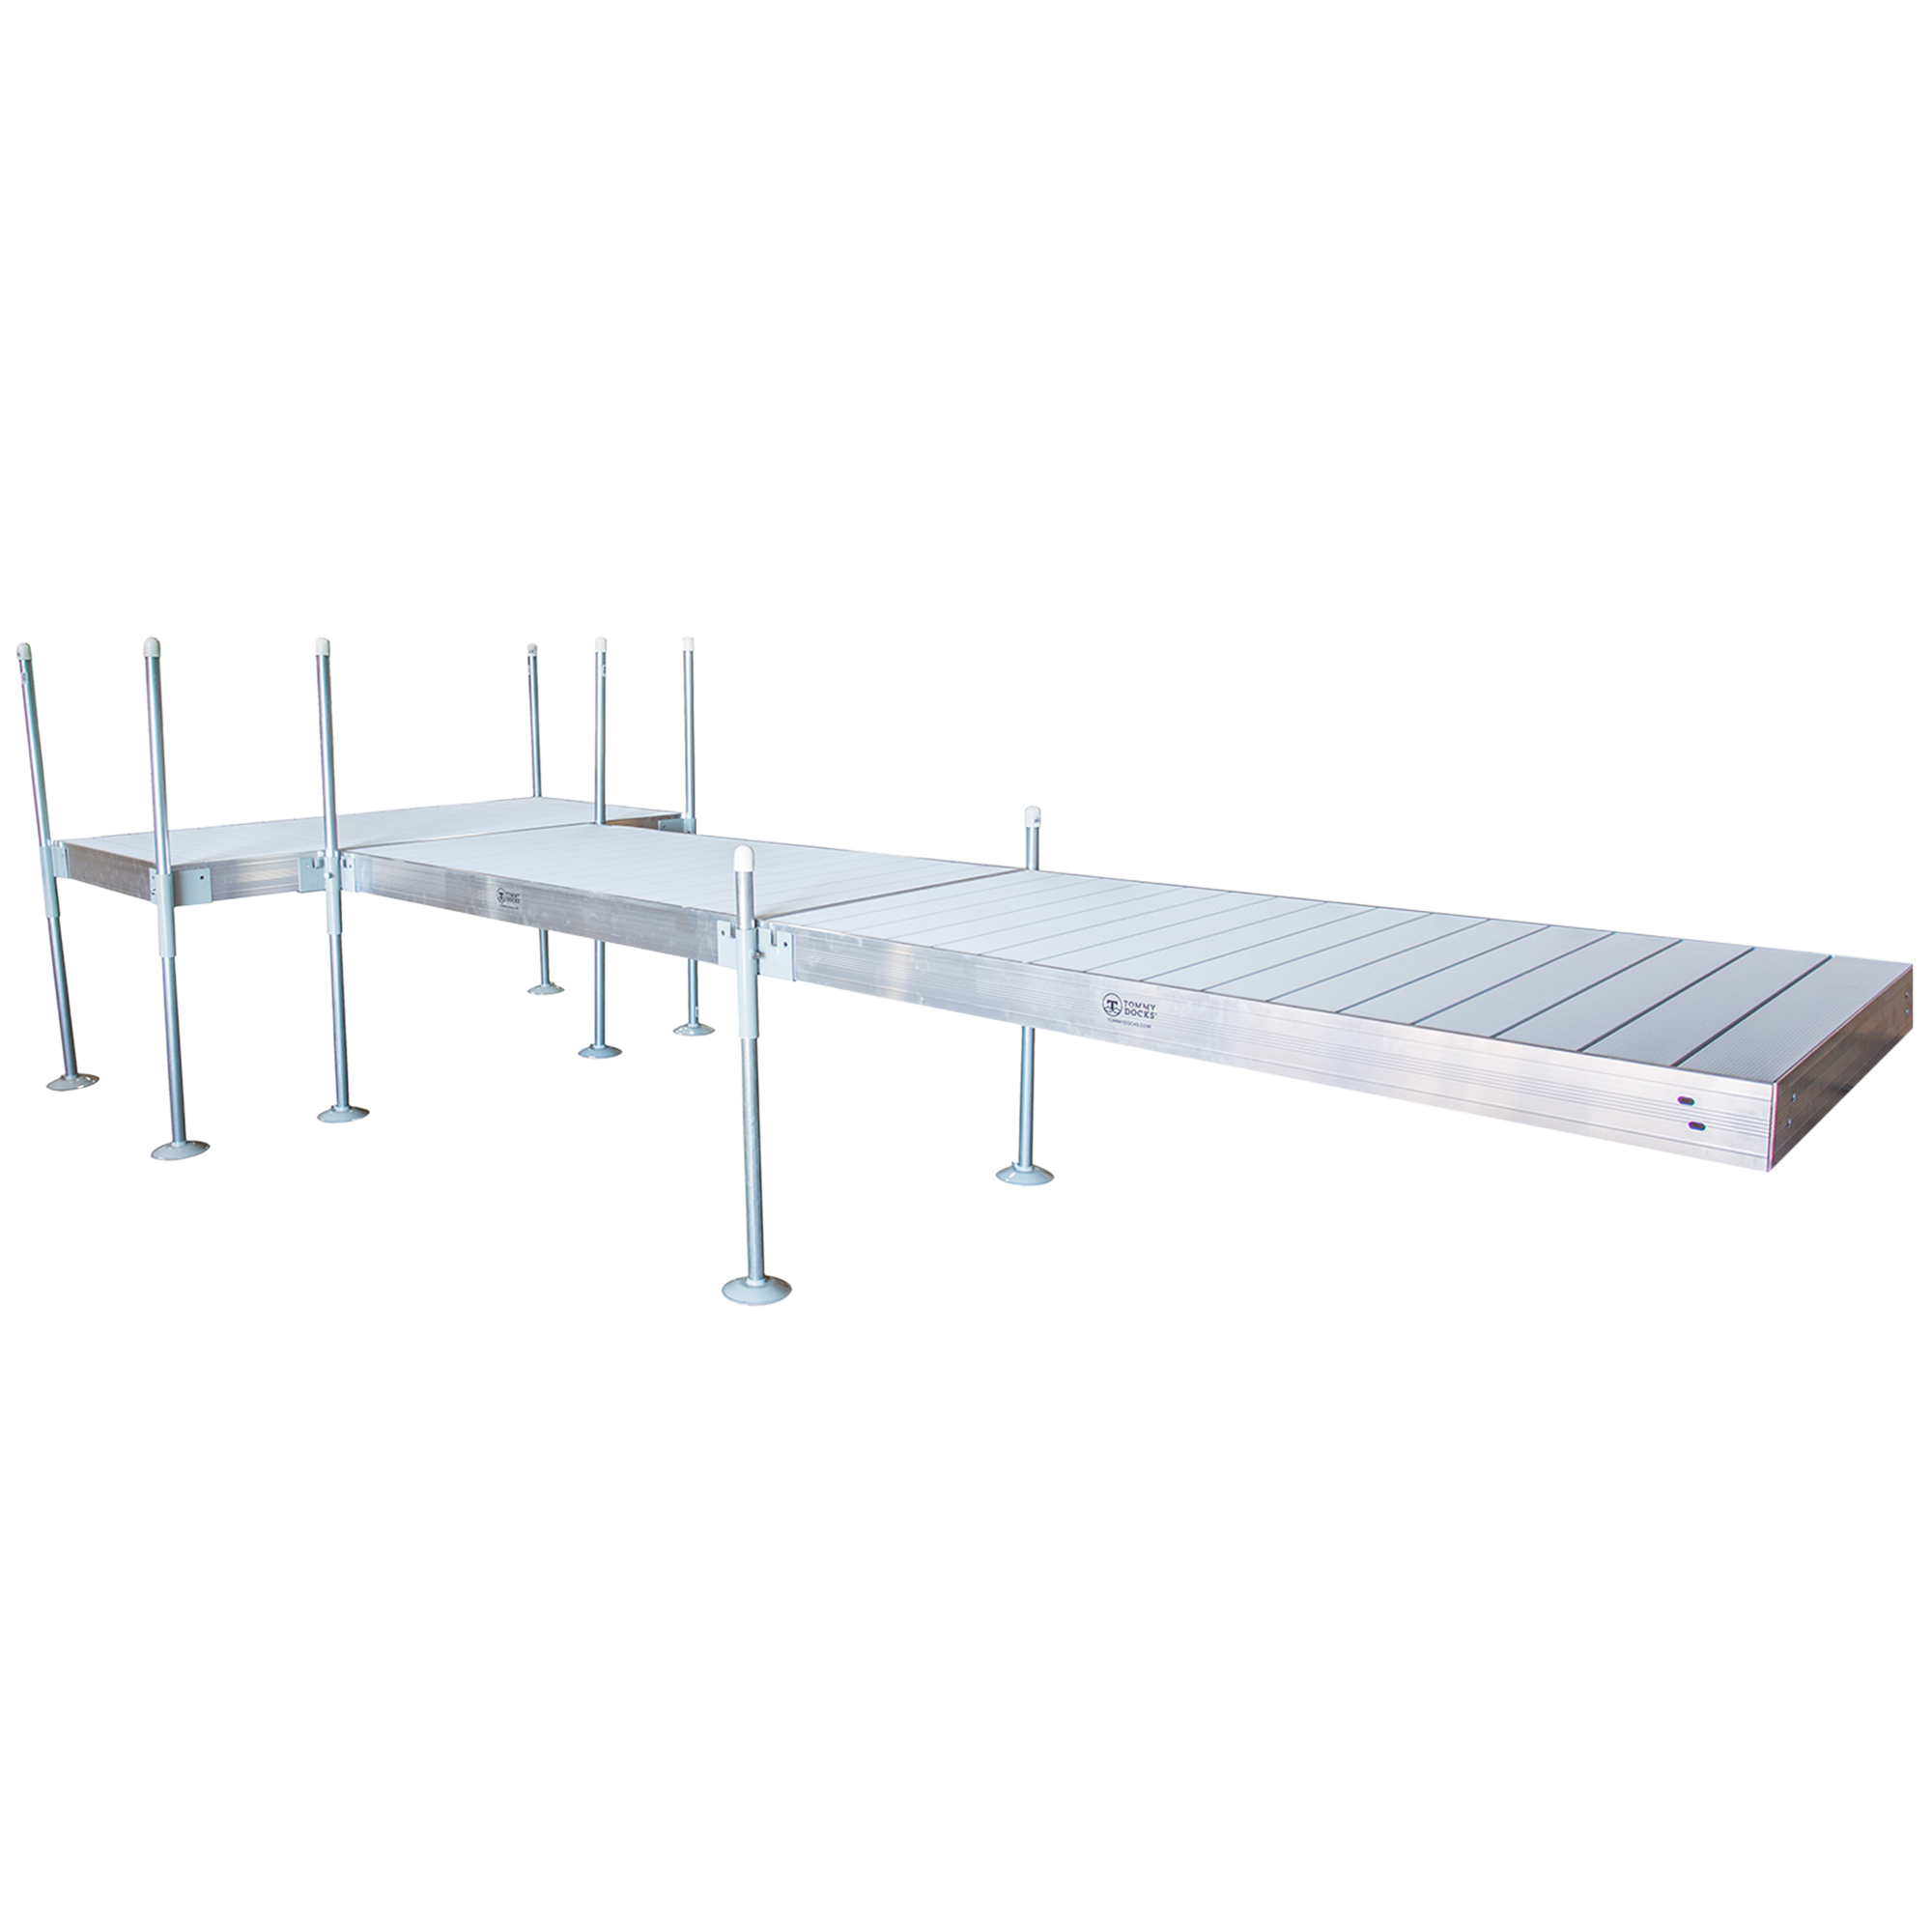 20’ T-Shaped Boat Dock System with Aluminum Frame and Aluminum Decking